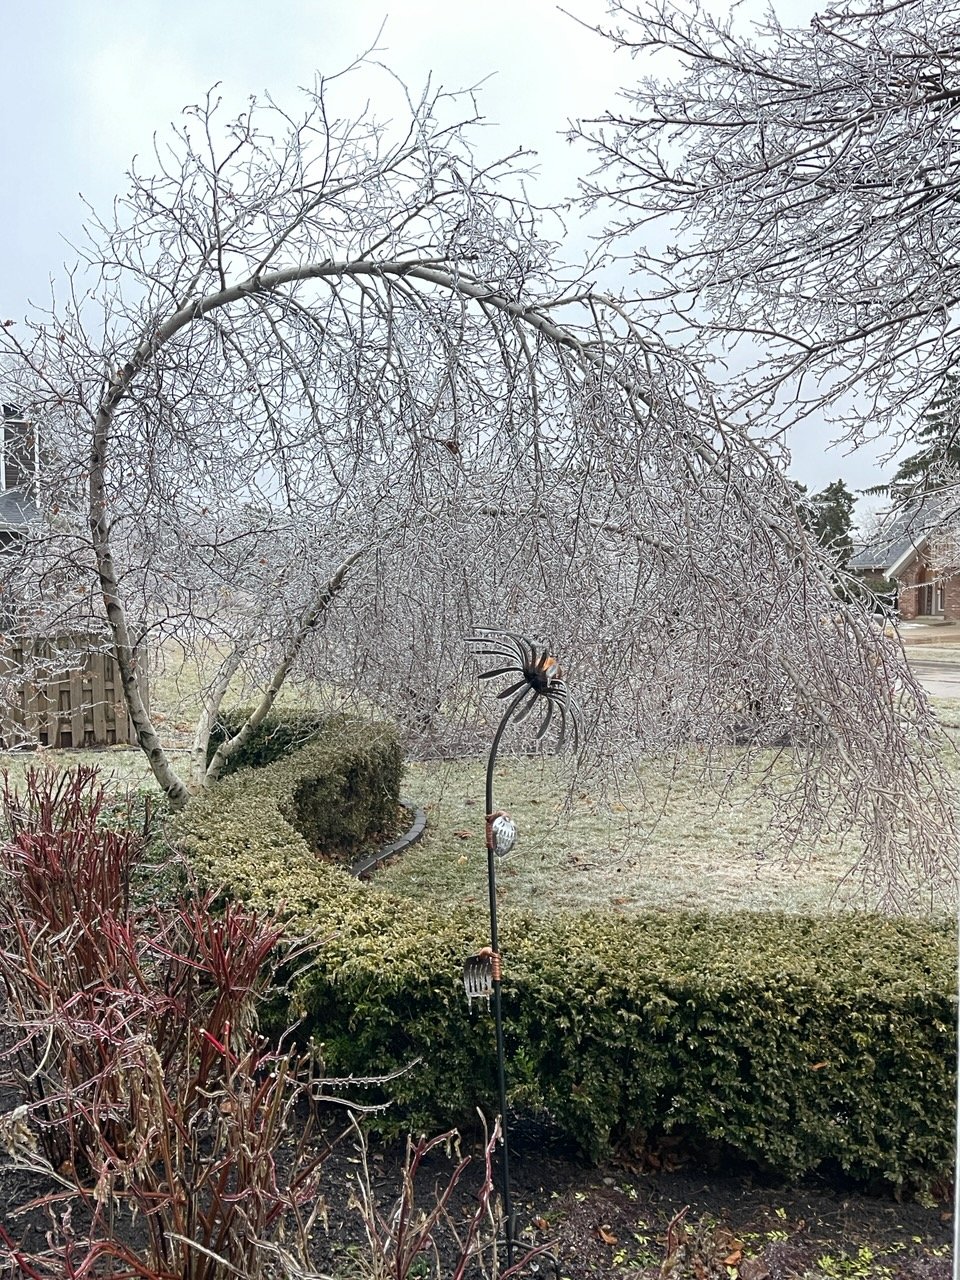 Photo showing damage caused by freezing rain in Lakewood, IL